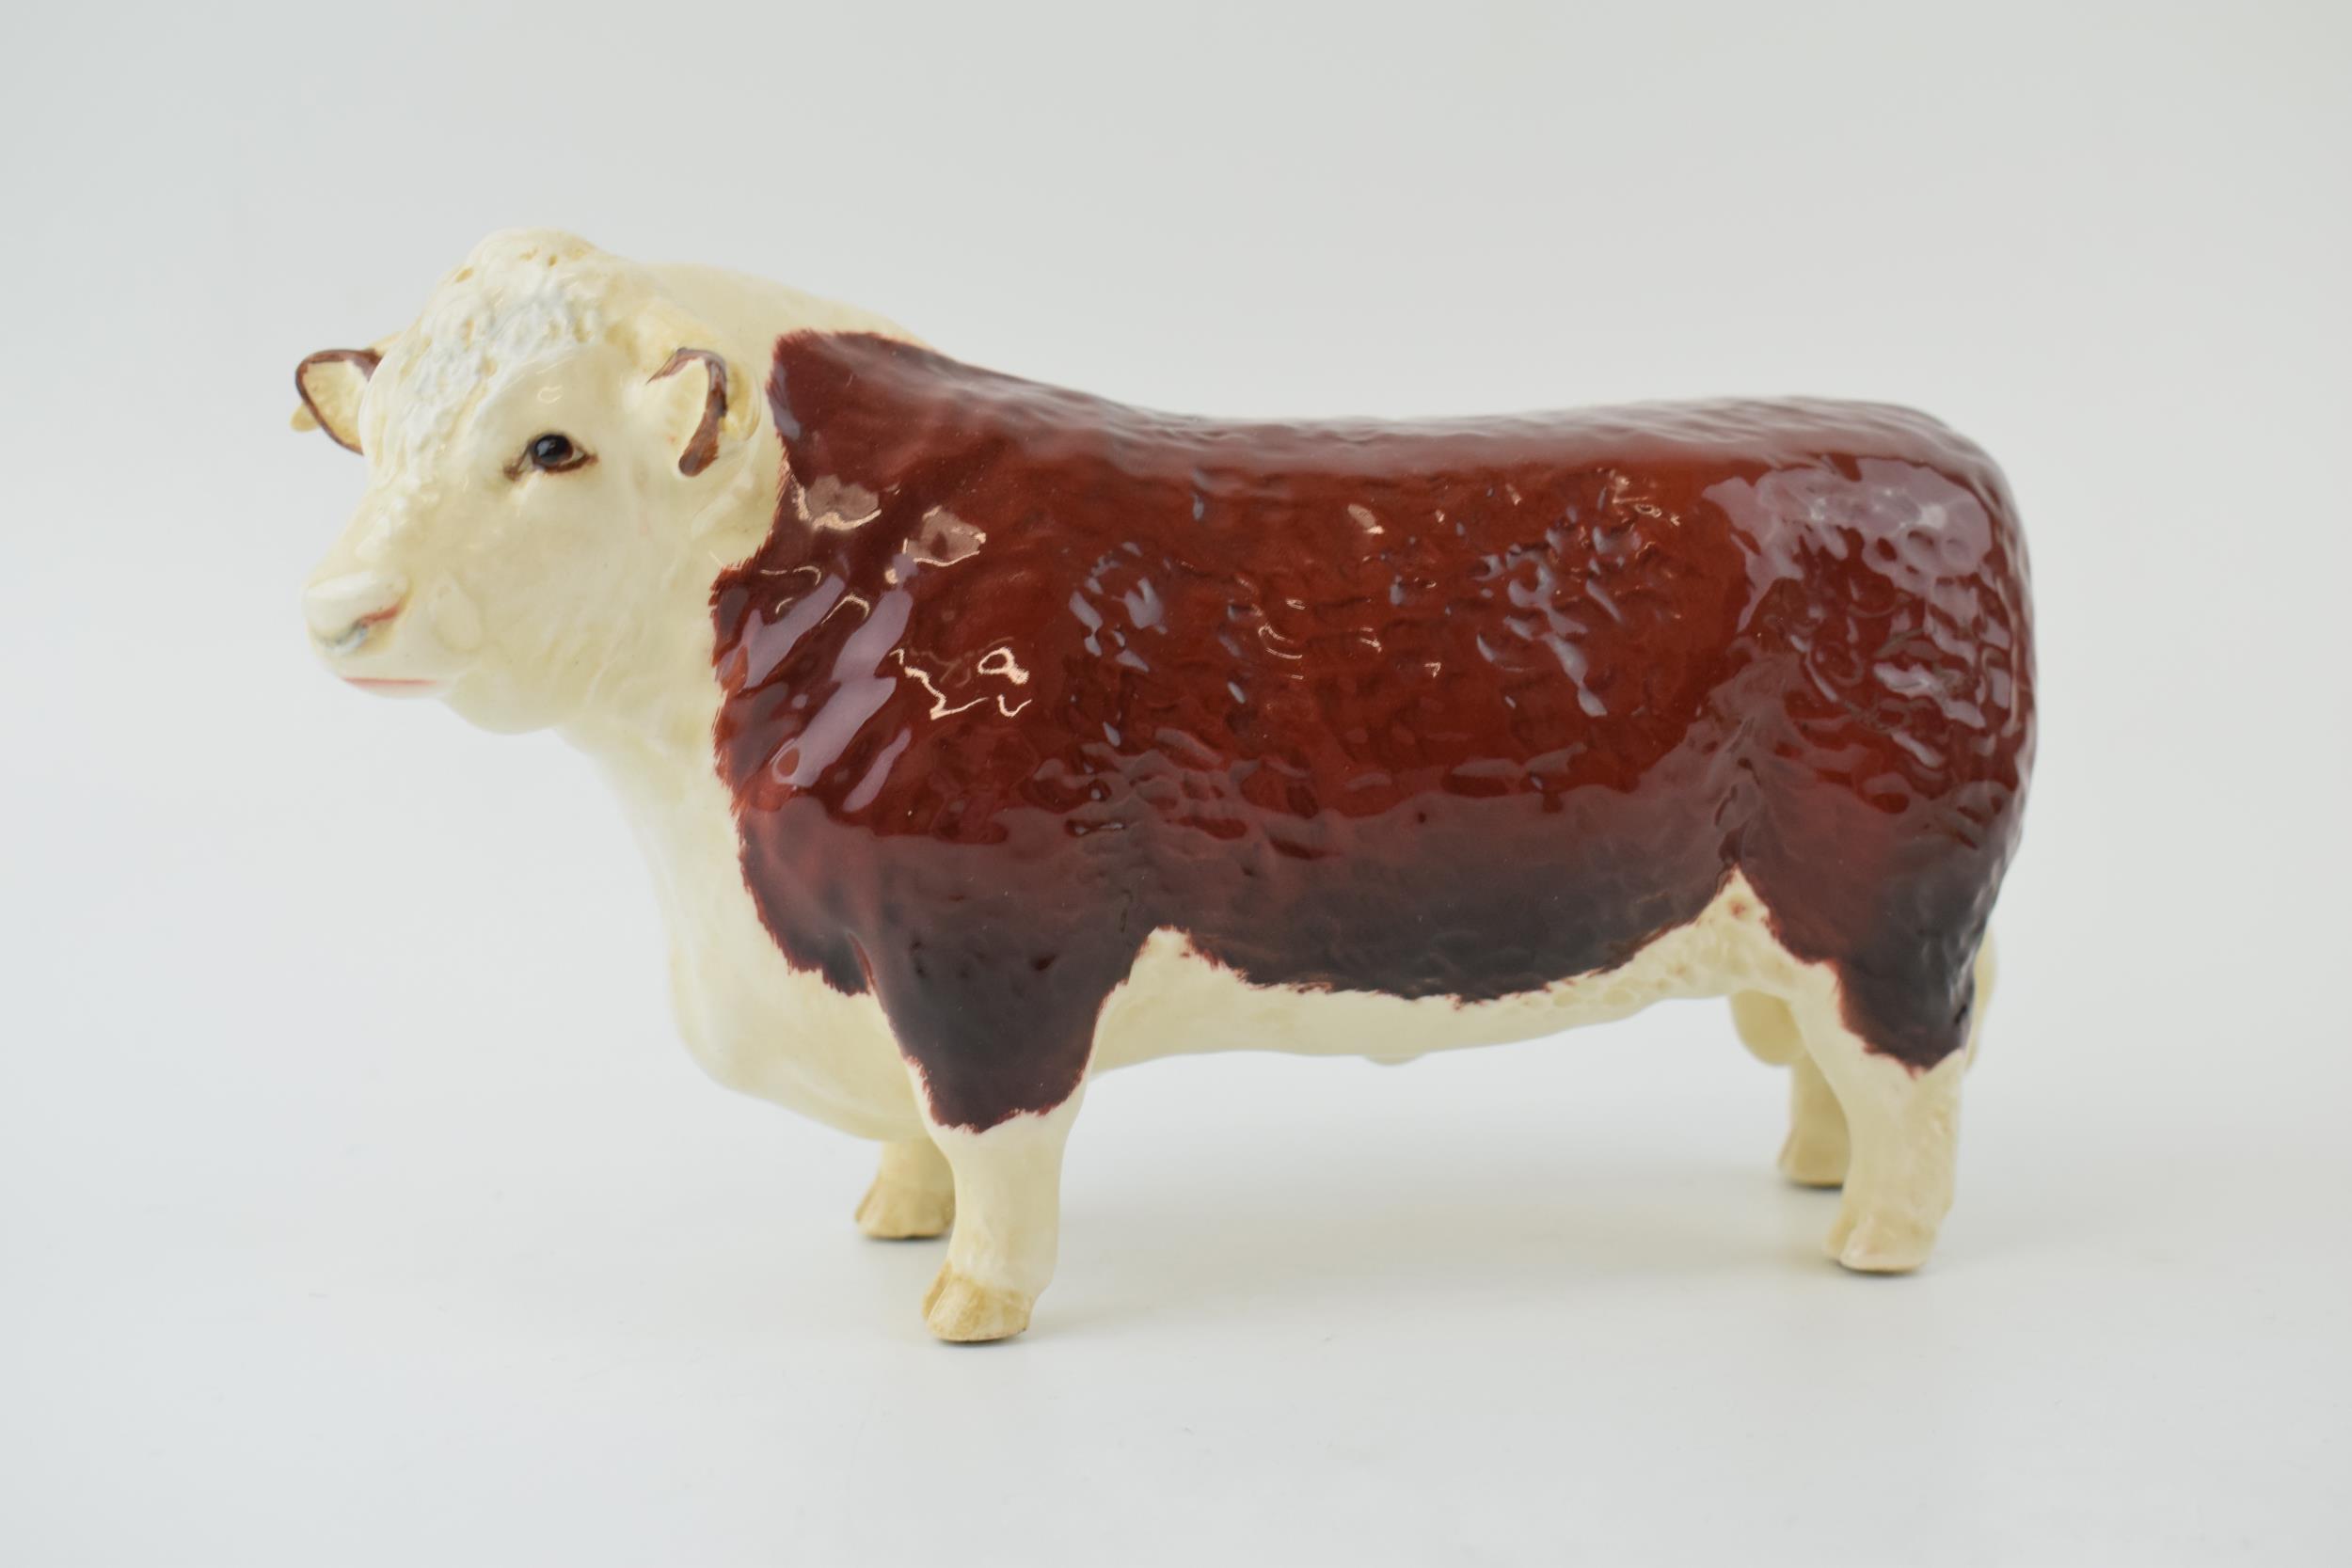 Beswick Hereford Bull. In good condition with no obvious damage or restoration.